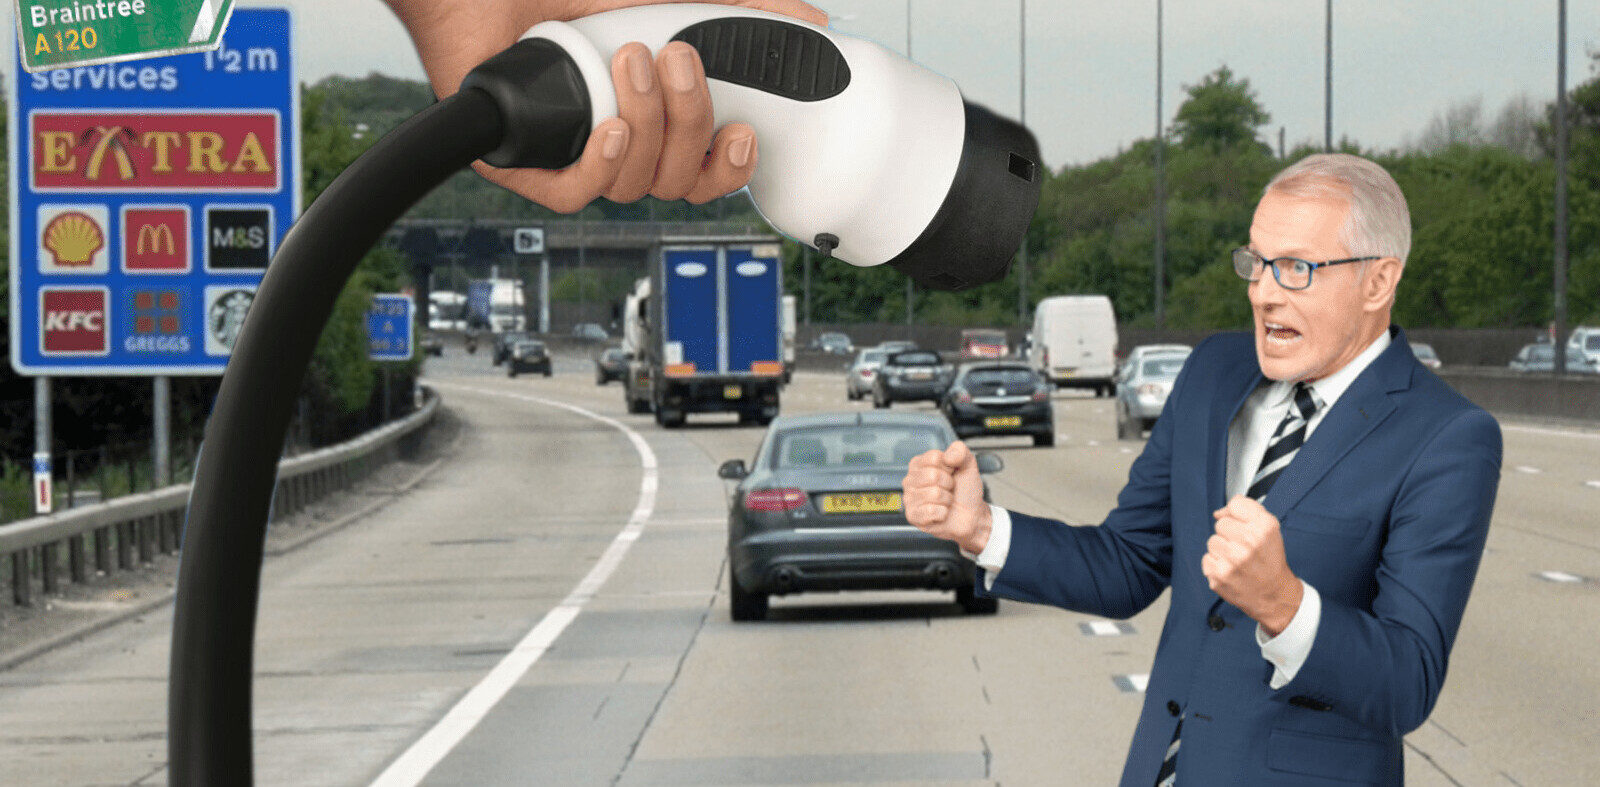 The UK’s first EV-only service station set to open soon